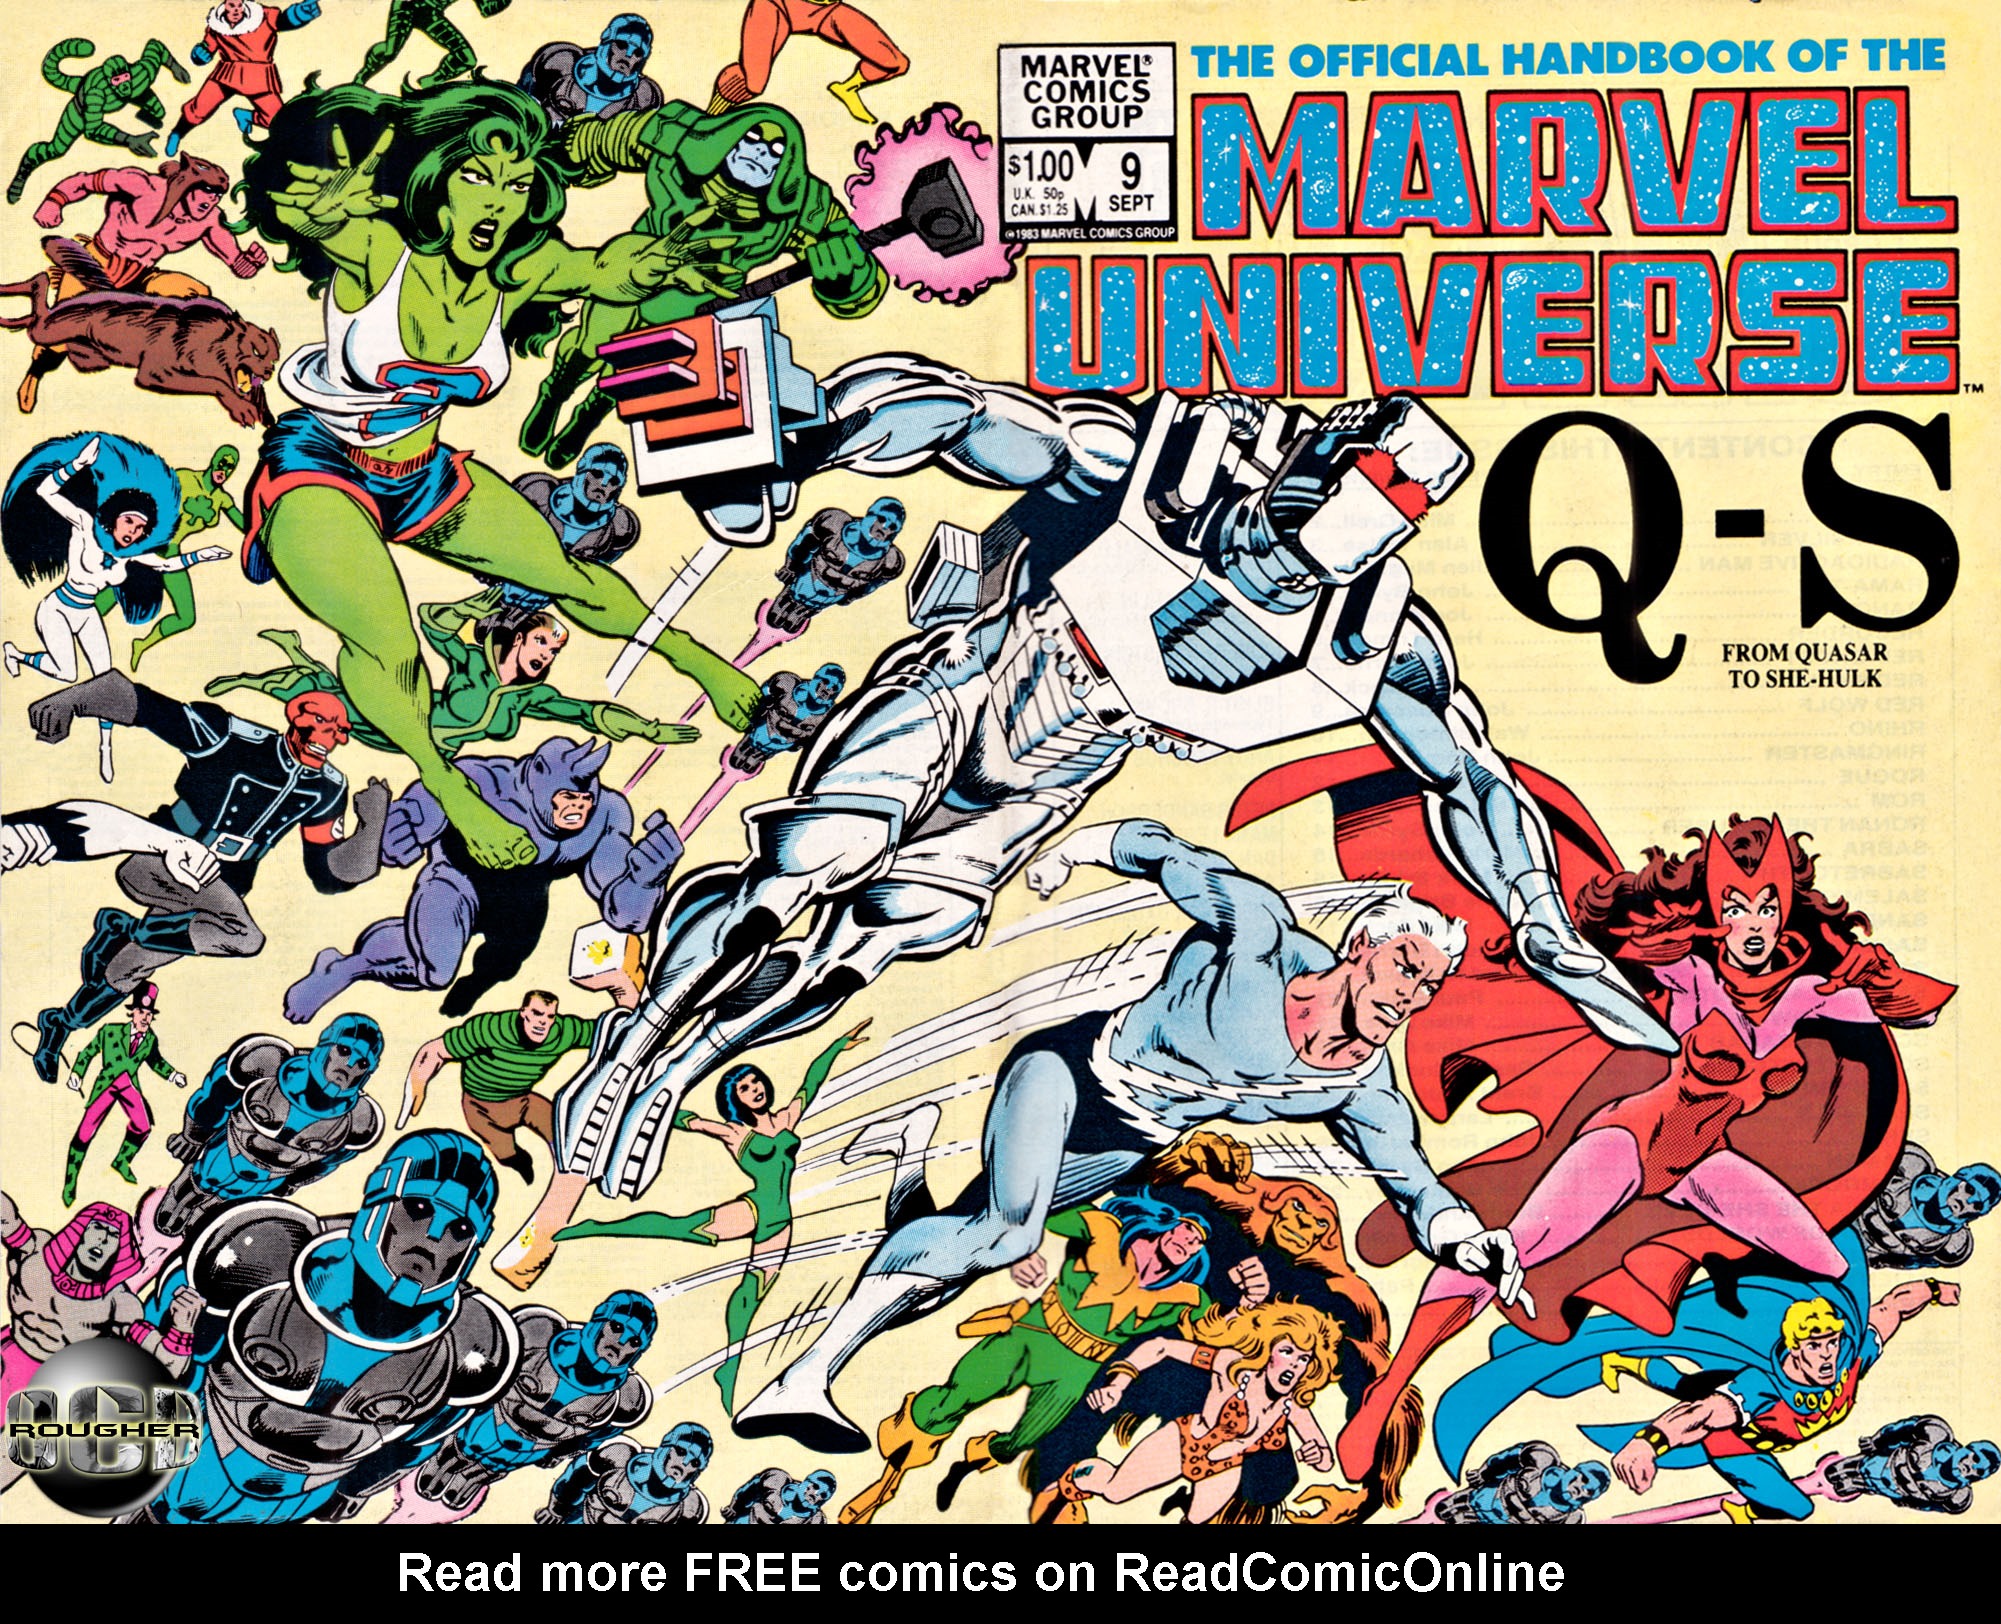 Read online The Official Handbook of the Marvel Universe comic -  Issue #9 - 1